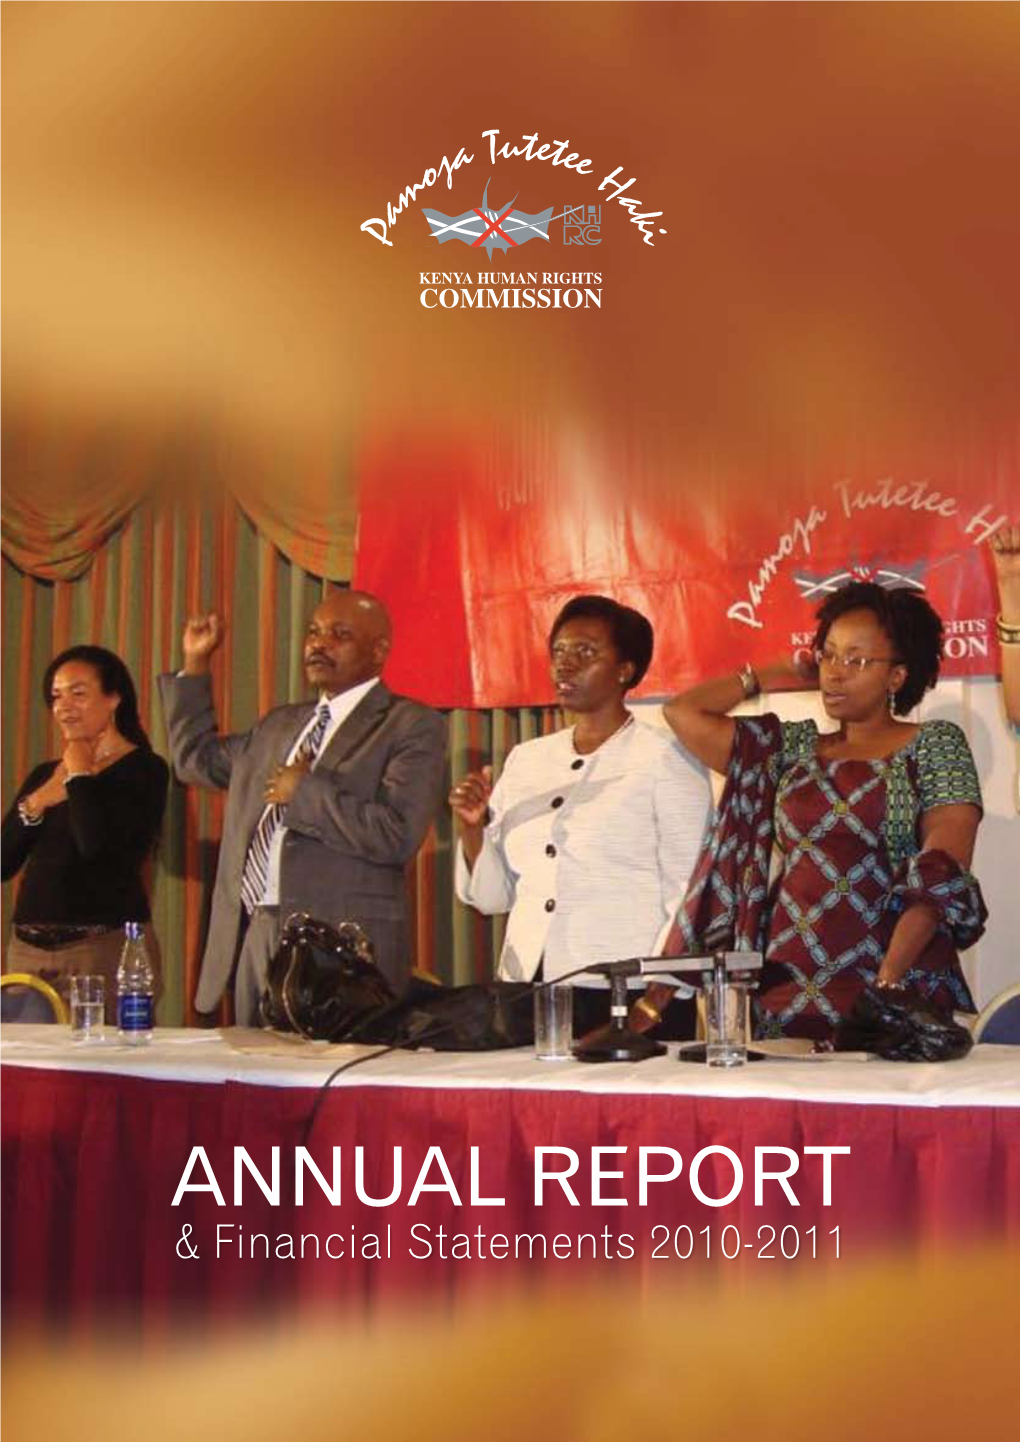 ANNUAL REPORT & Financial Statements 2010-2011